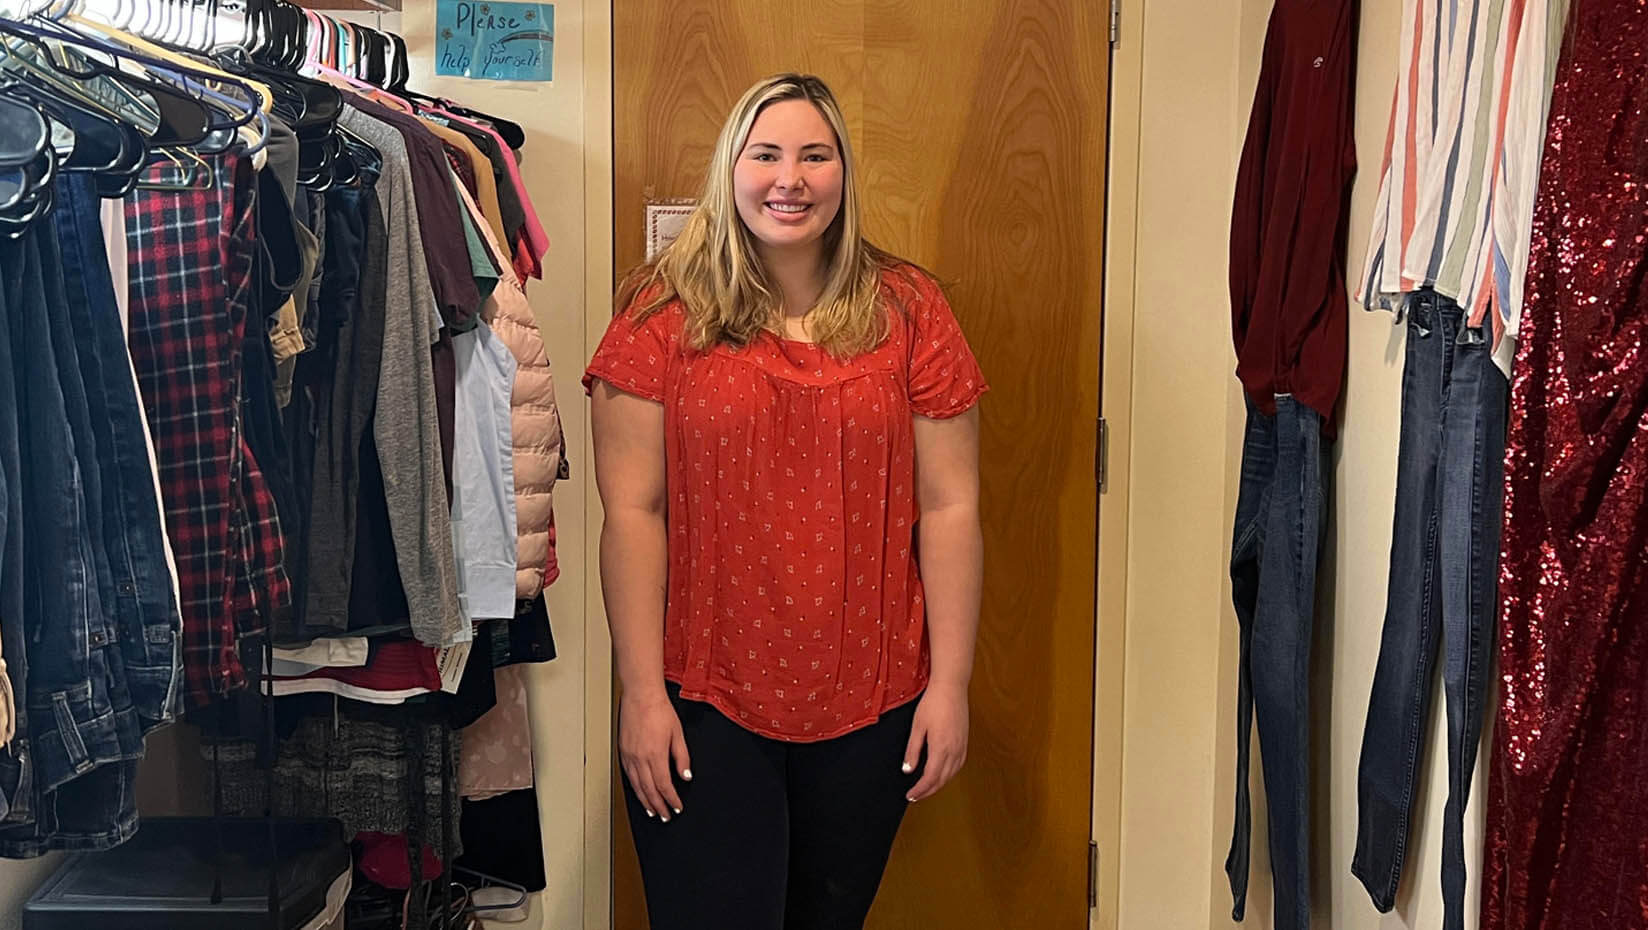 A photo of Janelle Goff standing with donated clothes